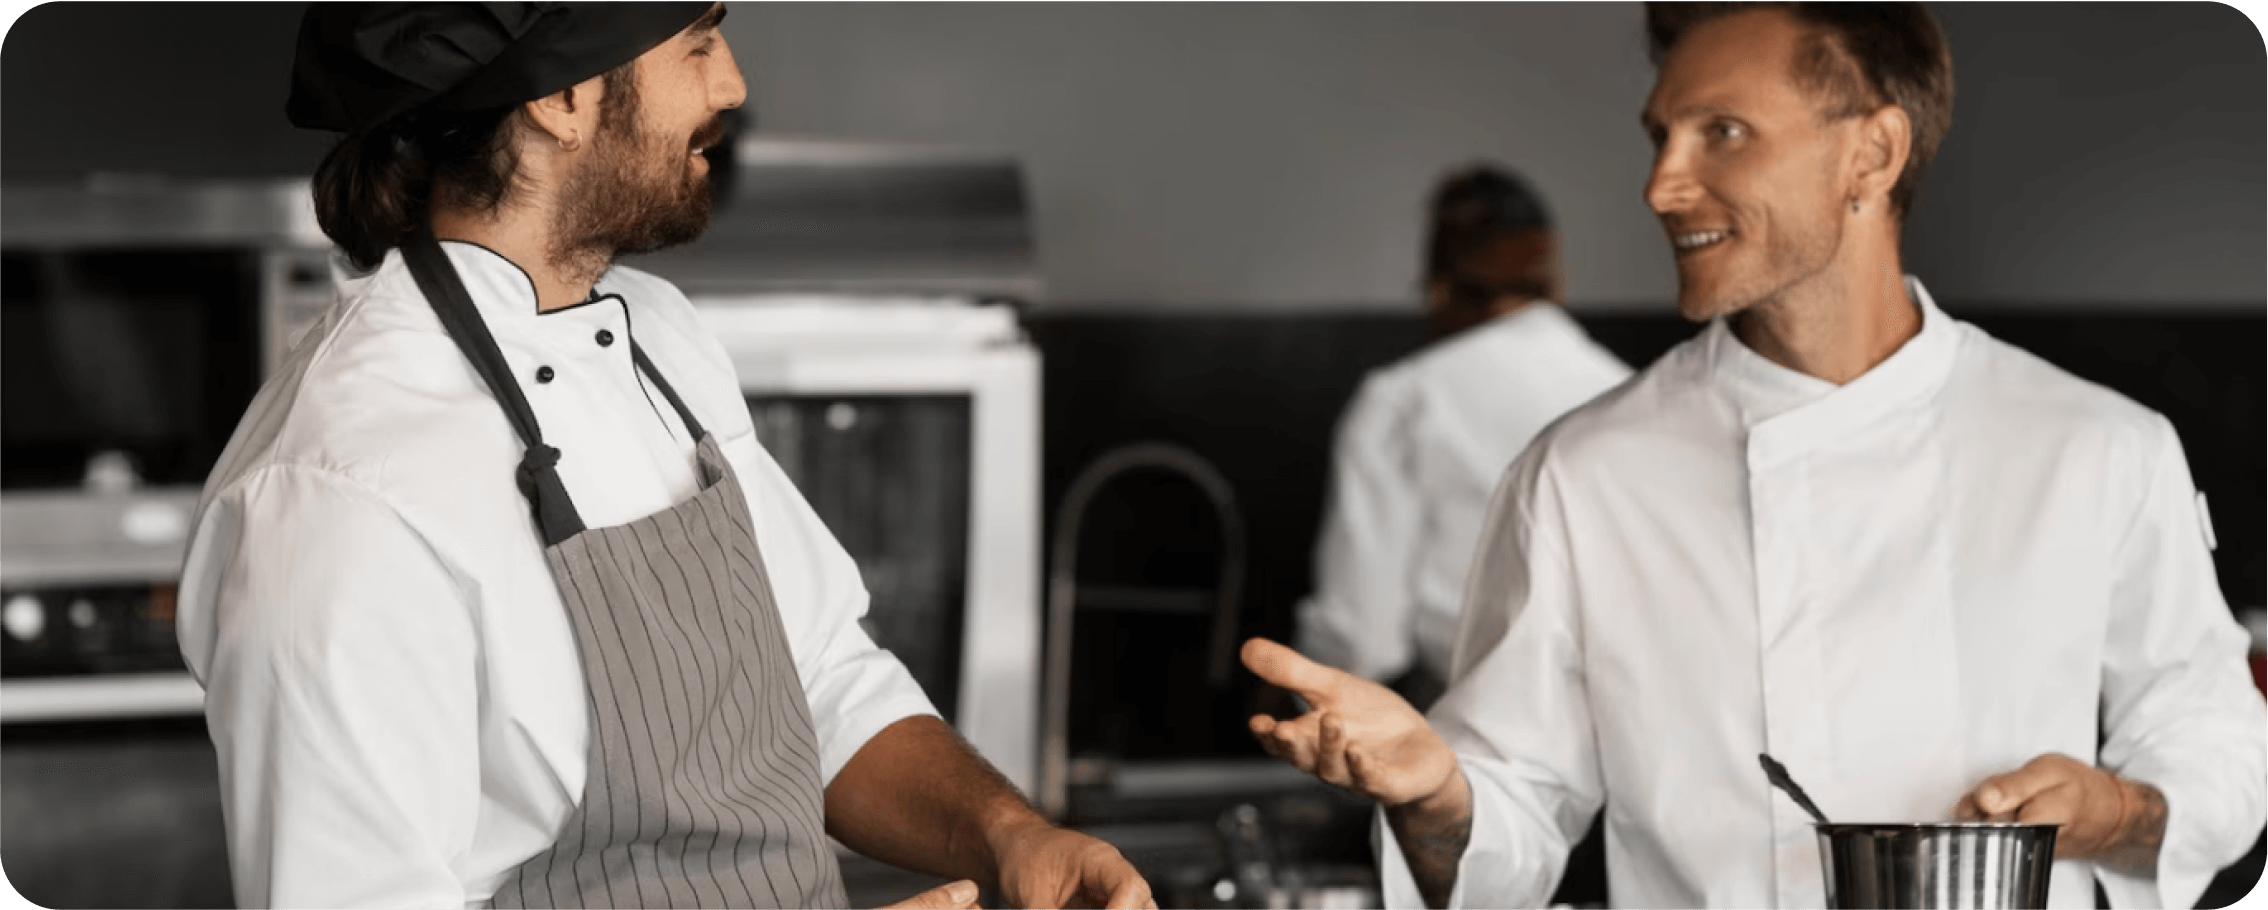 Two cooks are talking to each other in the kitchen.